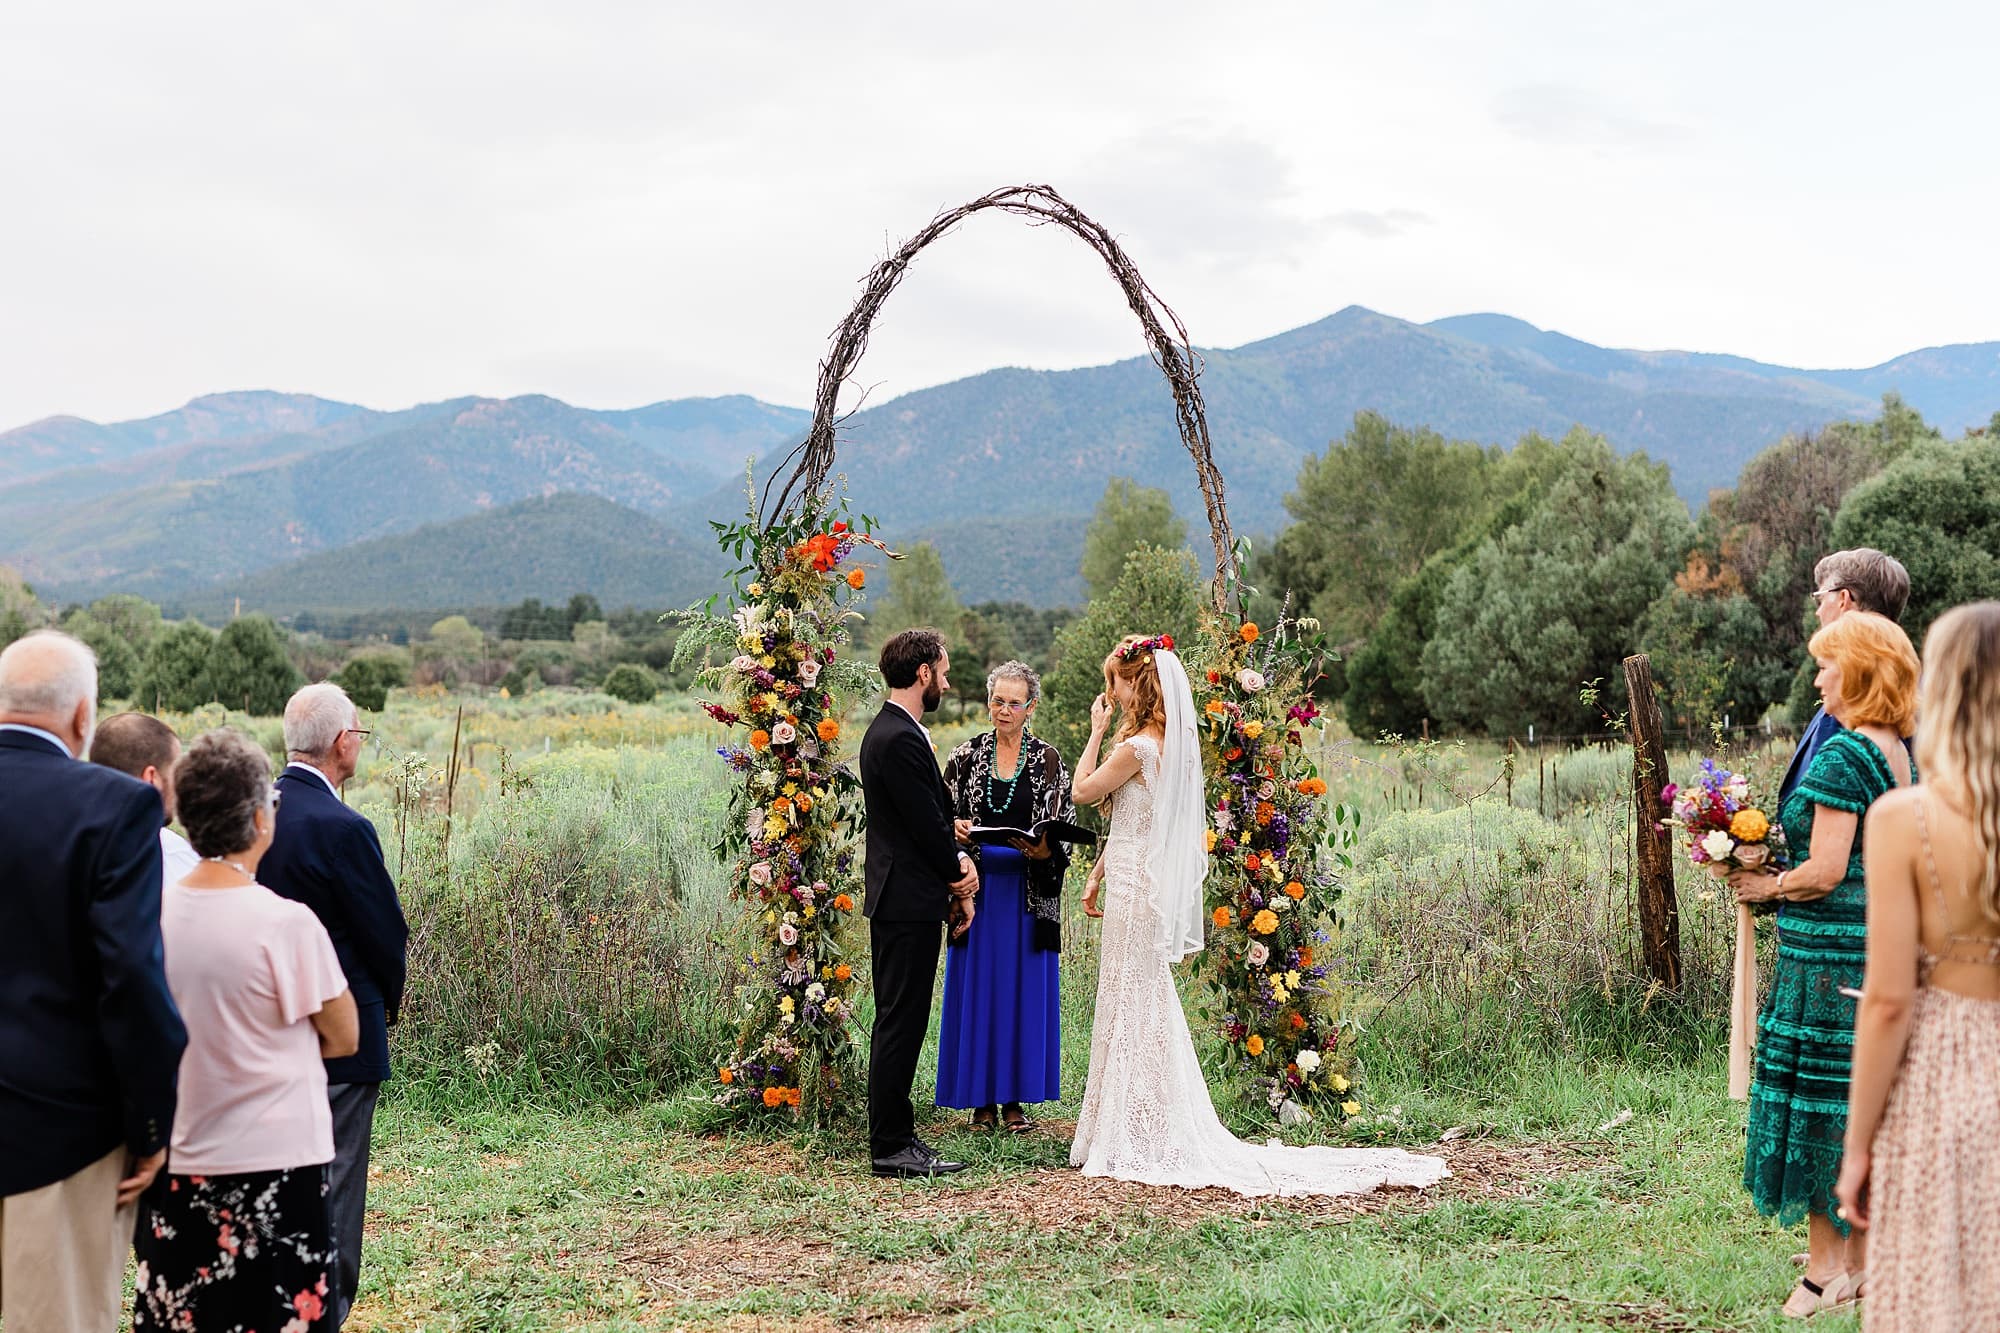 An intimate wedding with a floral arch is being held at Taos Goji Farm.